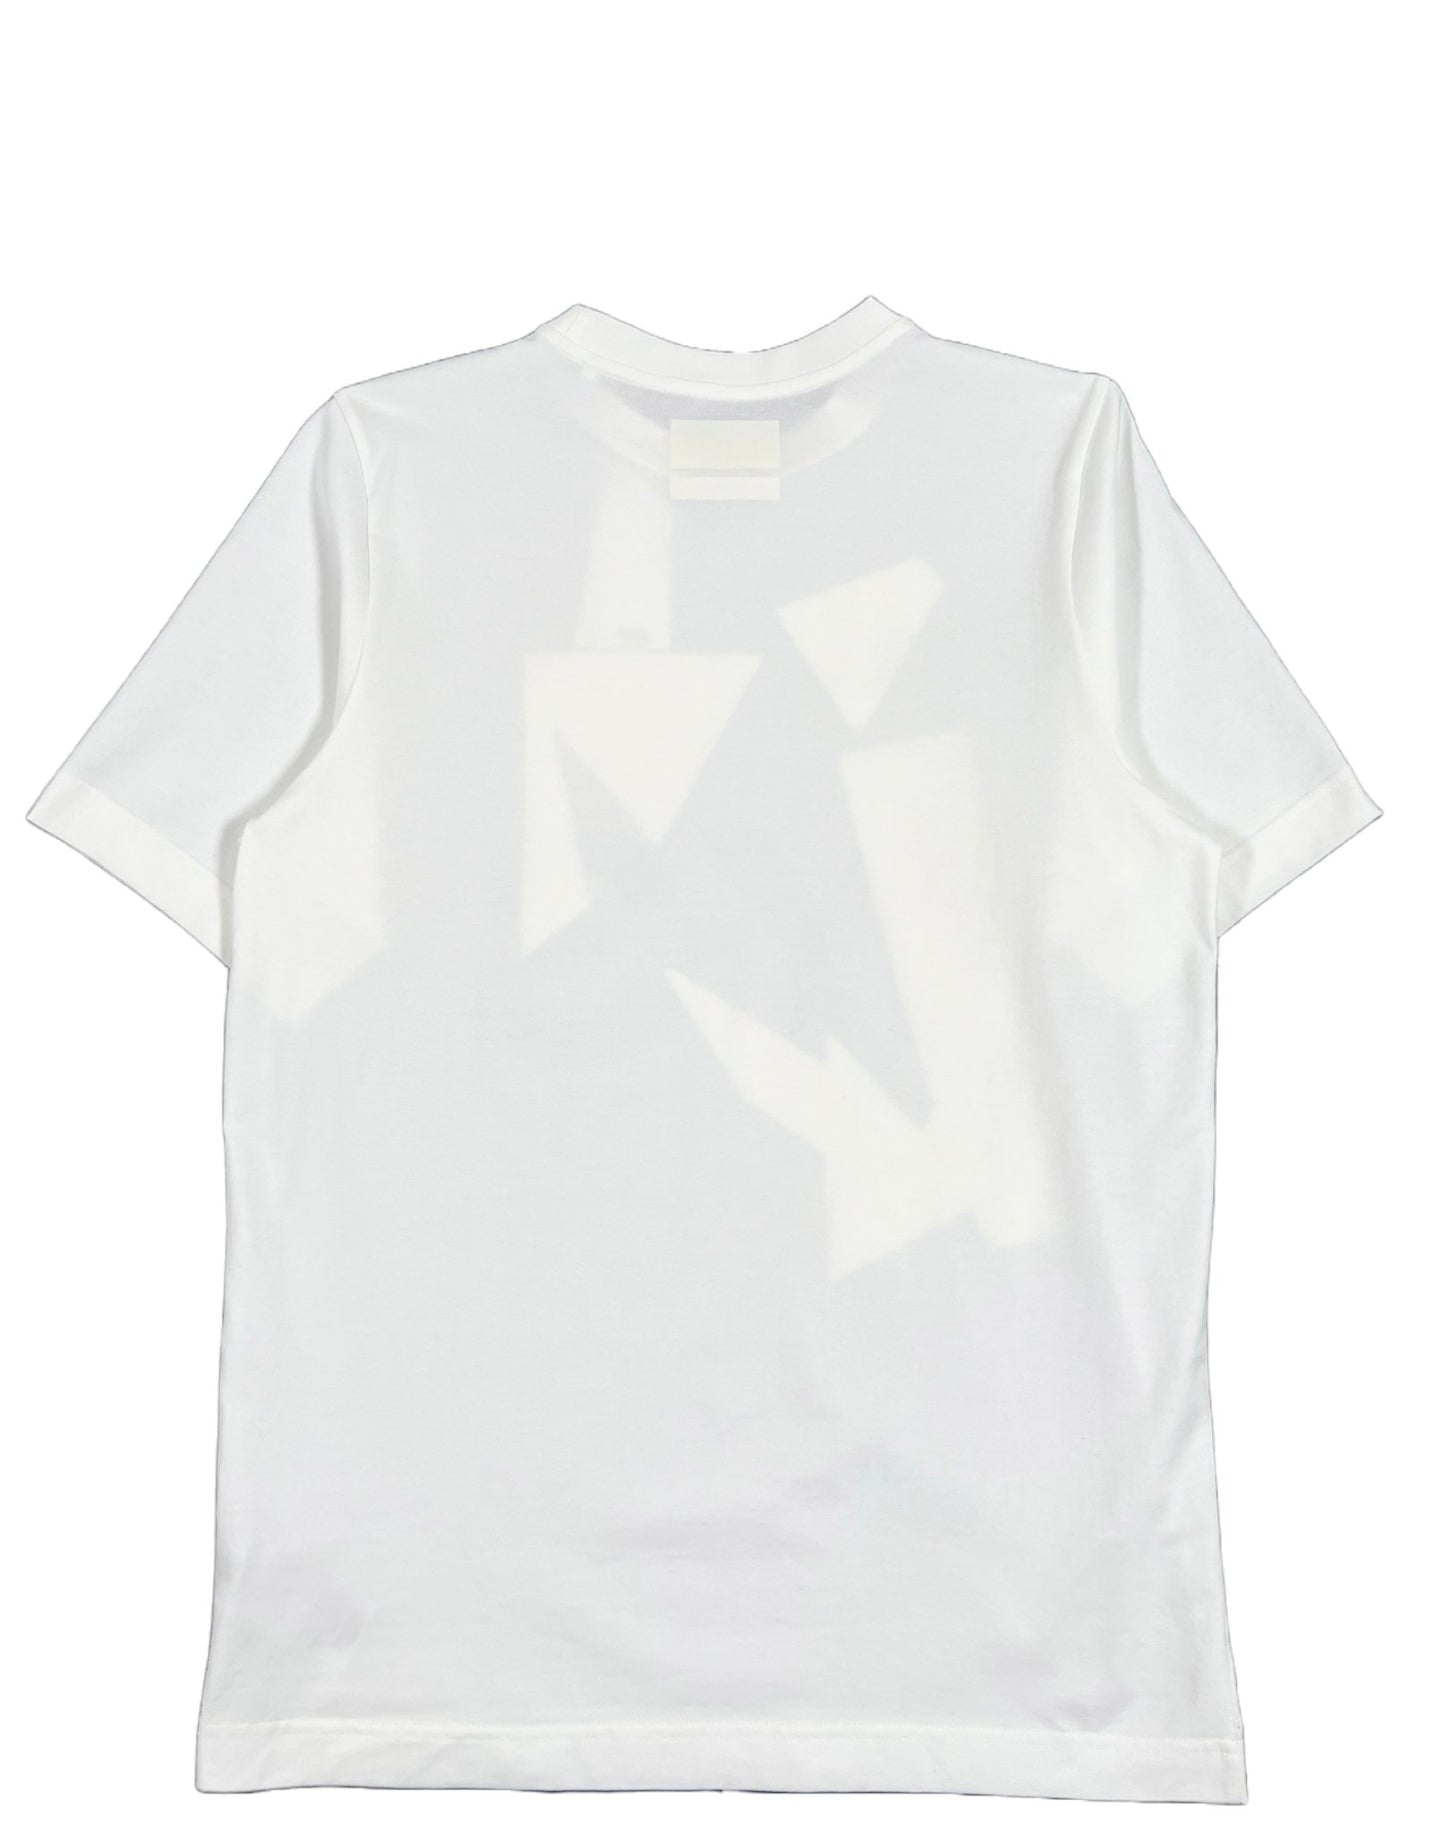 A white ADIDAS x Y-3 graphic t-shirt with a triangle on the front.